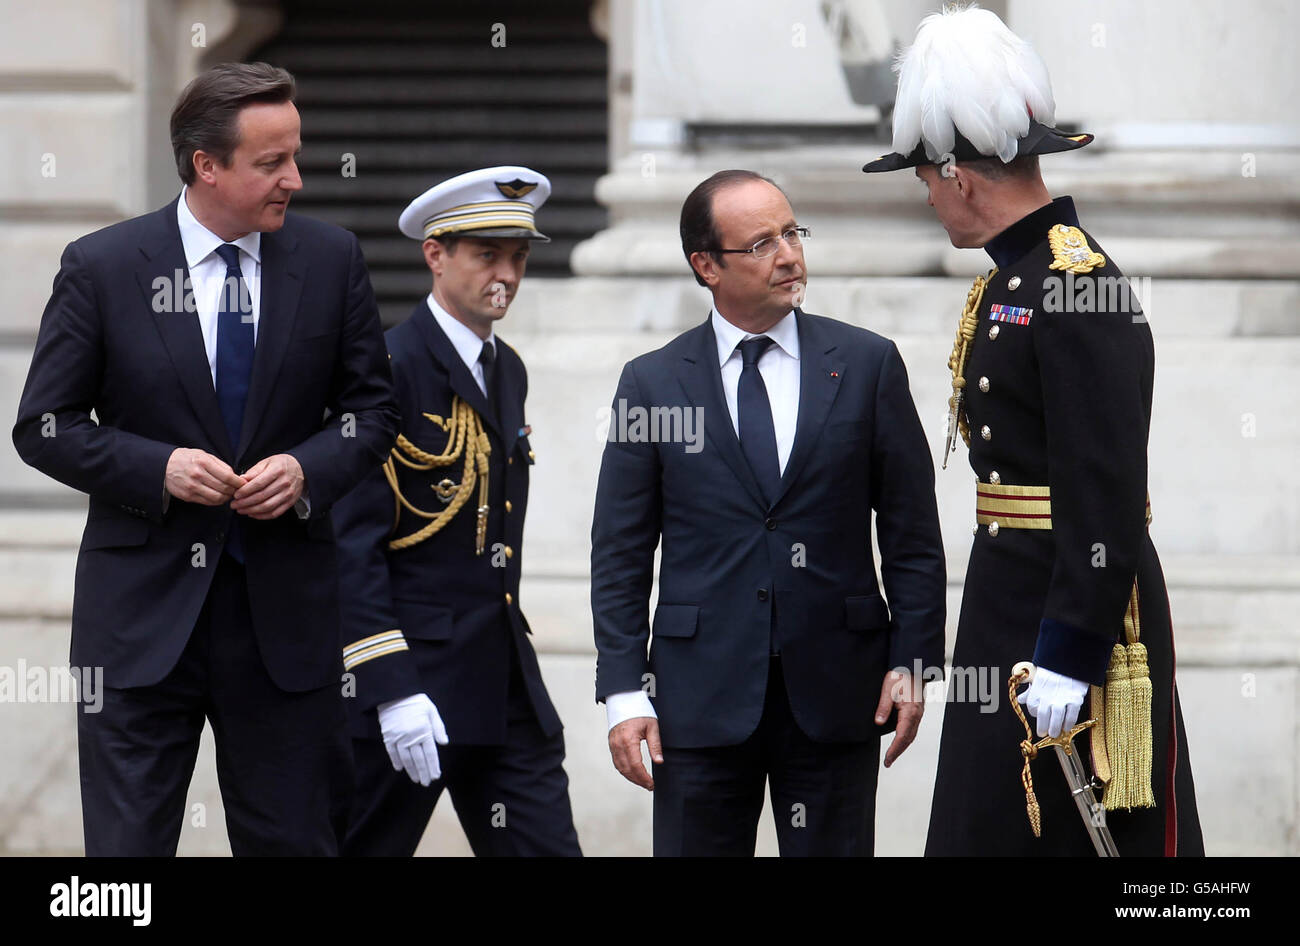 French President Francois Hollande (second right) speaks with the Major-General George Norton, the General Officer Commanding London District (right) while Prime Minister David Cameron (left) looks on outside the Foreign and Commonwealth Office in London, to mark the French president's first visit to Britain since taking office. Stock Photo